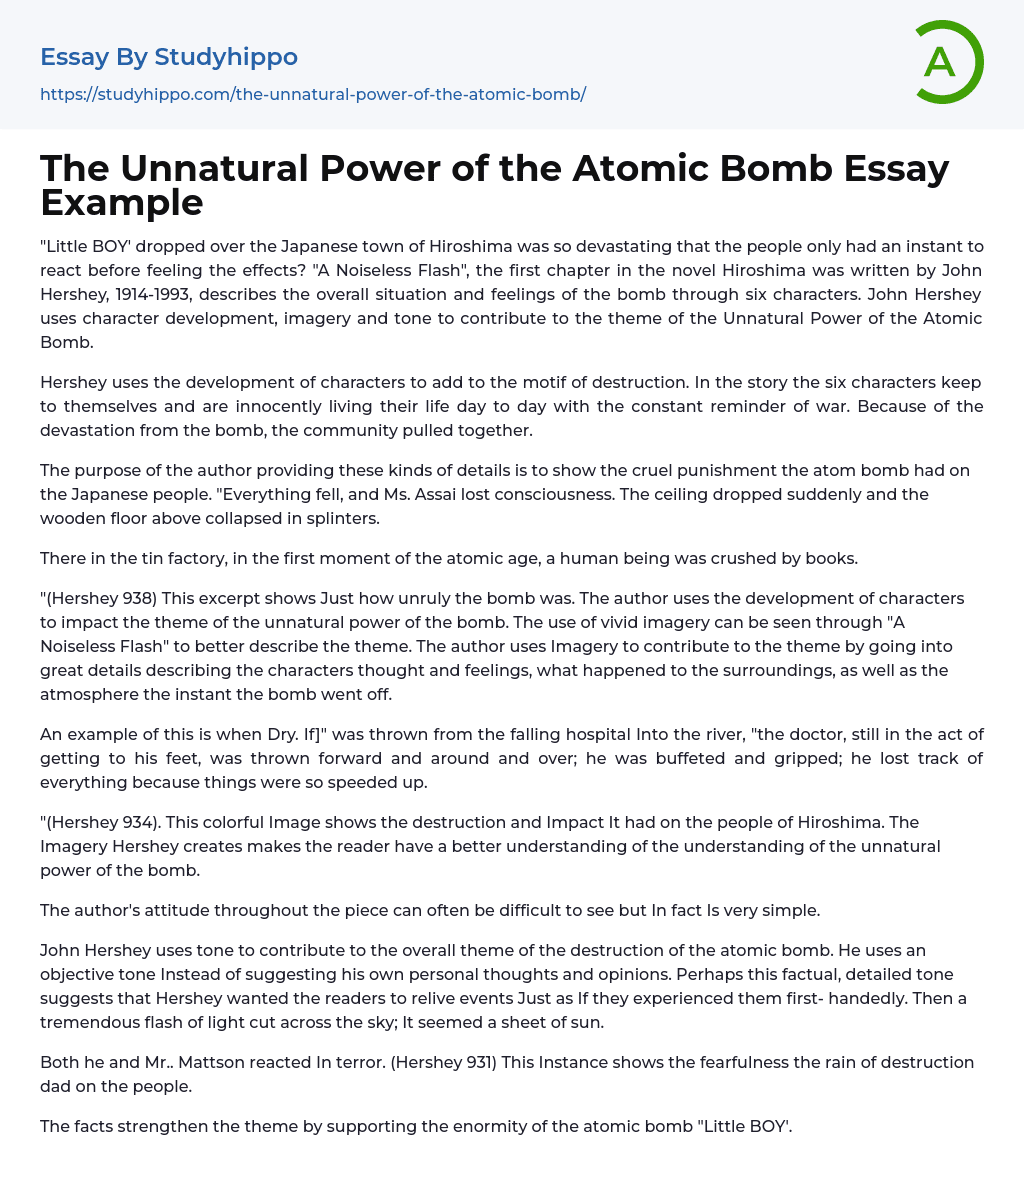 The Unnatural Power of the Atomic Bomb Essay Example